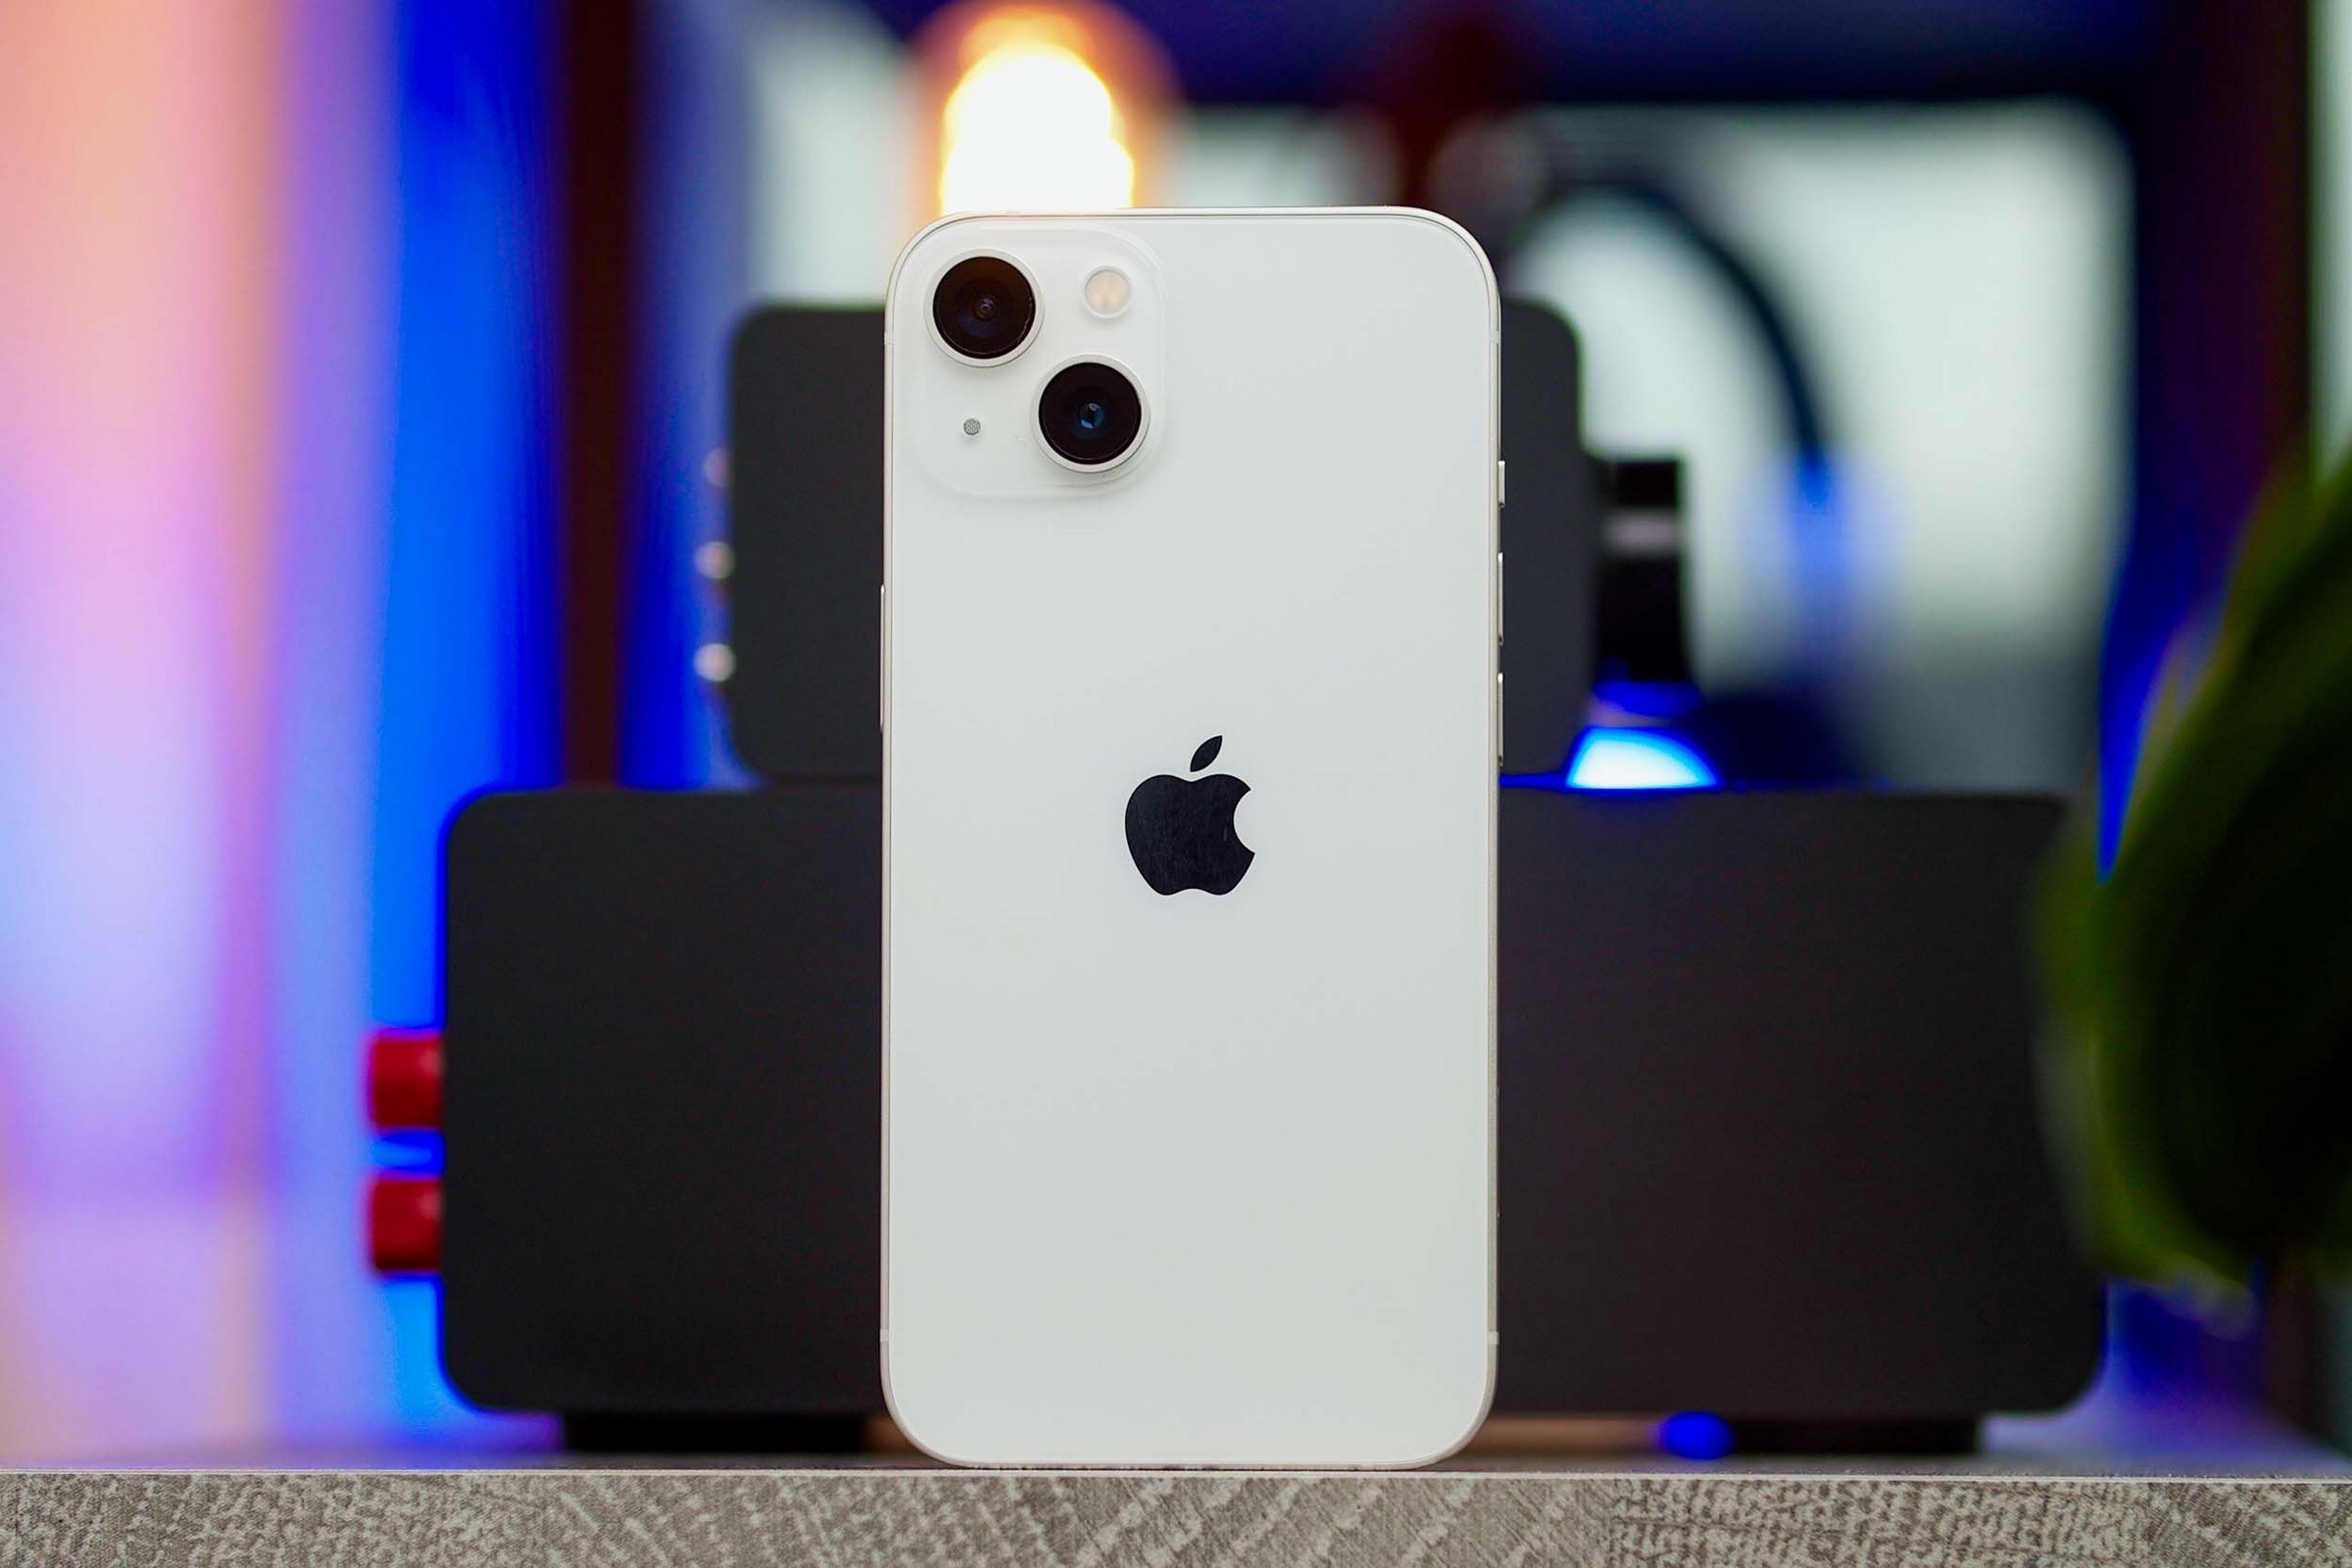 Best refurbished iPhone deals and sales for June 2022